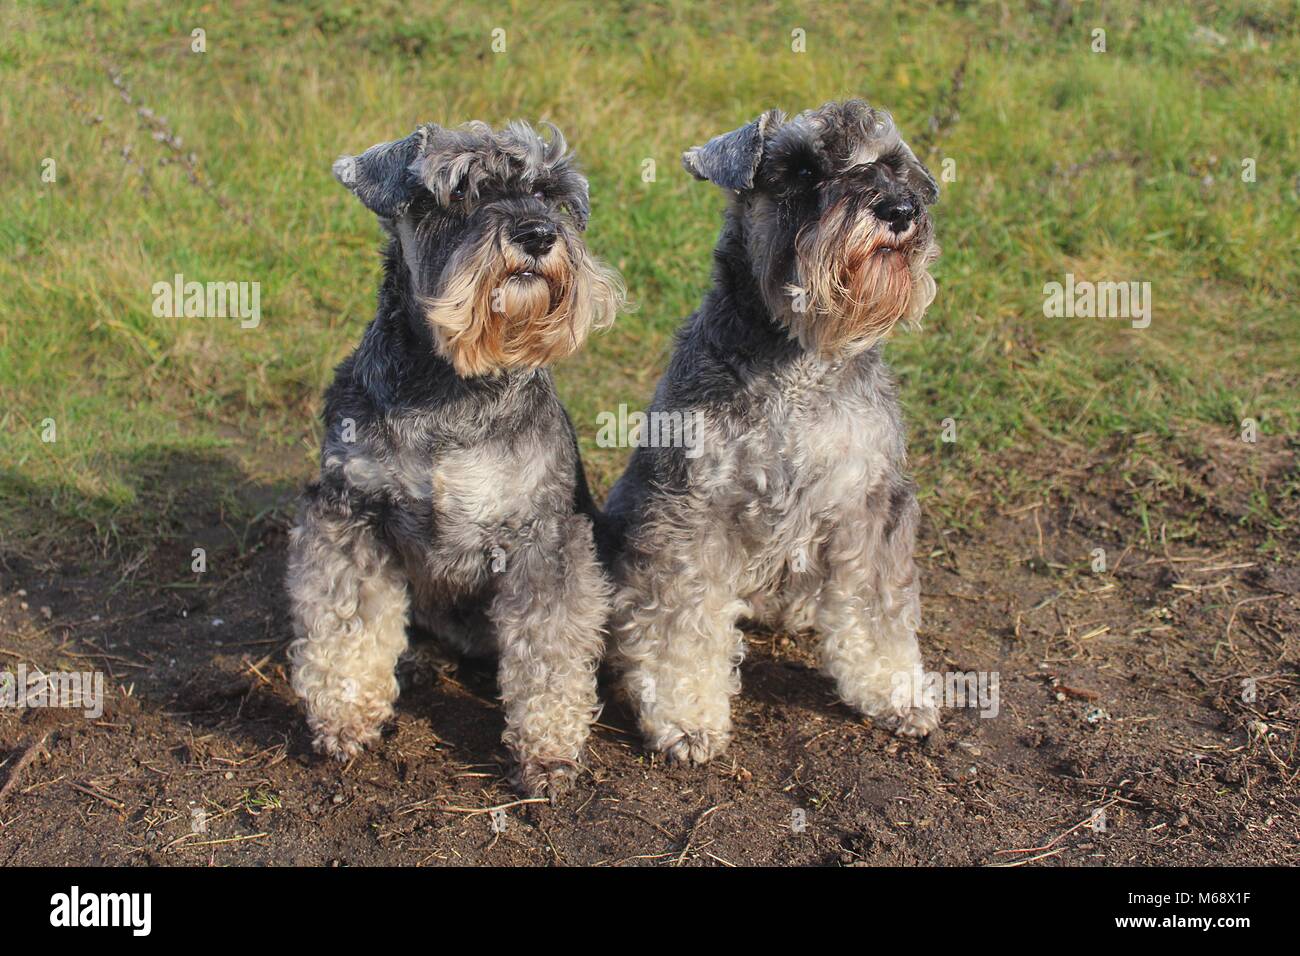 salt and pepper schnauzer for sale